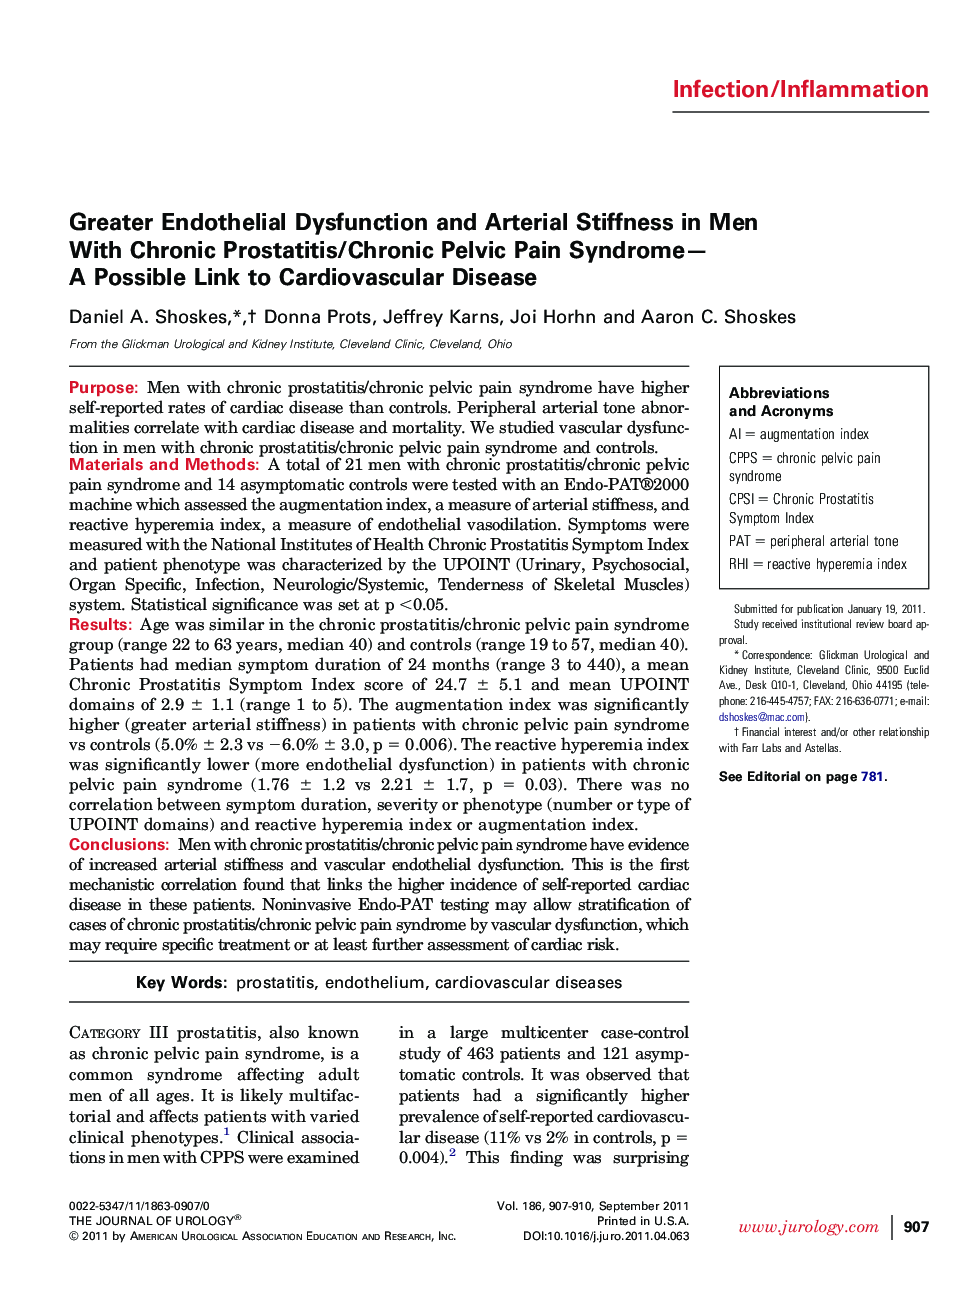 Greater Endothelial Dysfunction and Arterial Stiffness in Men With Chronic Prostatitis/Chronic Pelvic Pain Syndrome—A Possible Link to Cardiovascular Disease 